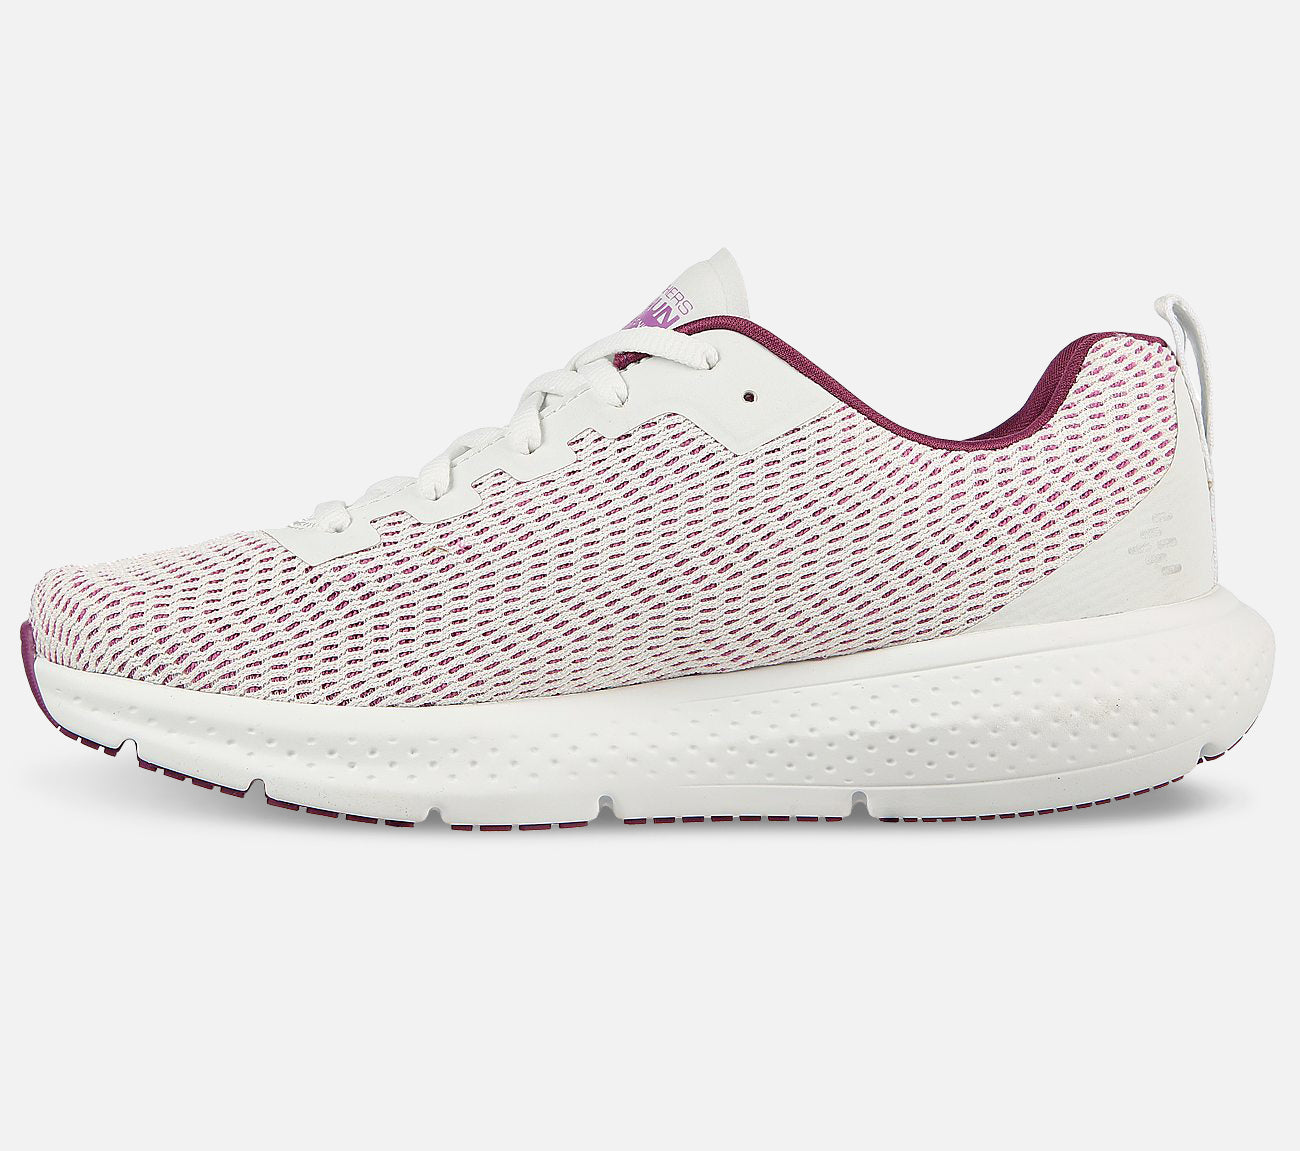 GO RUN Supersonic - Relaxed Fit Shoe Skechers